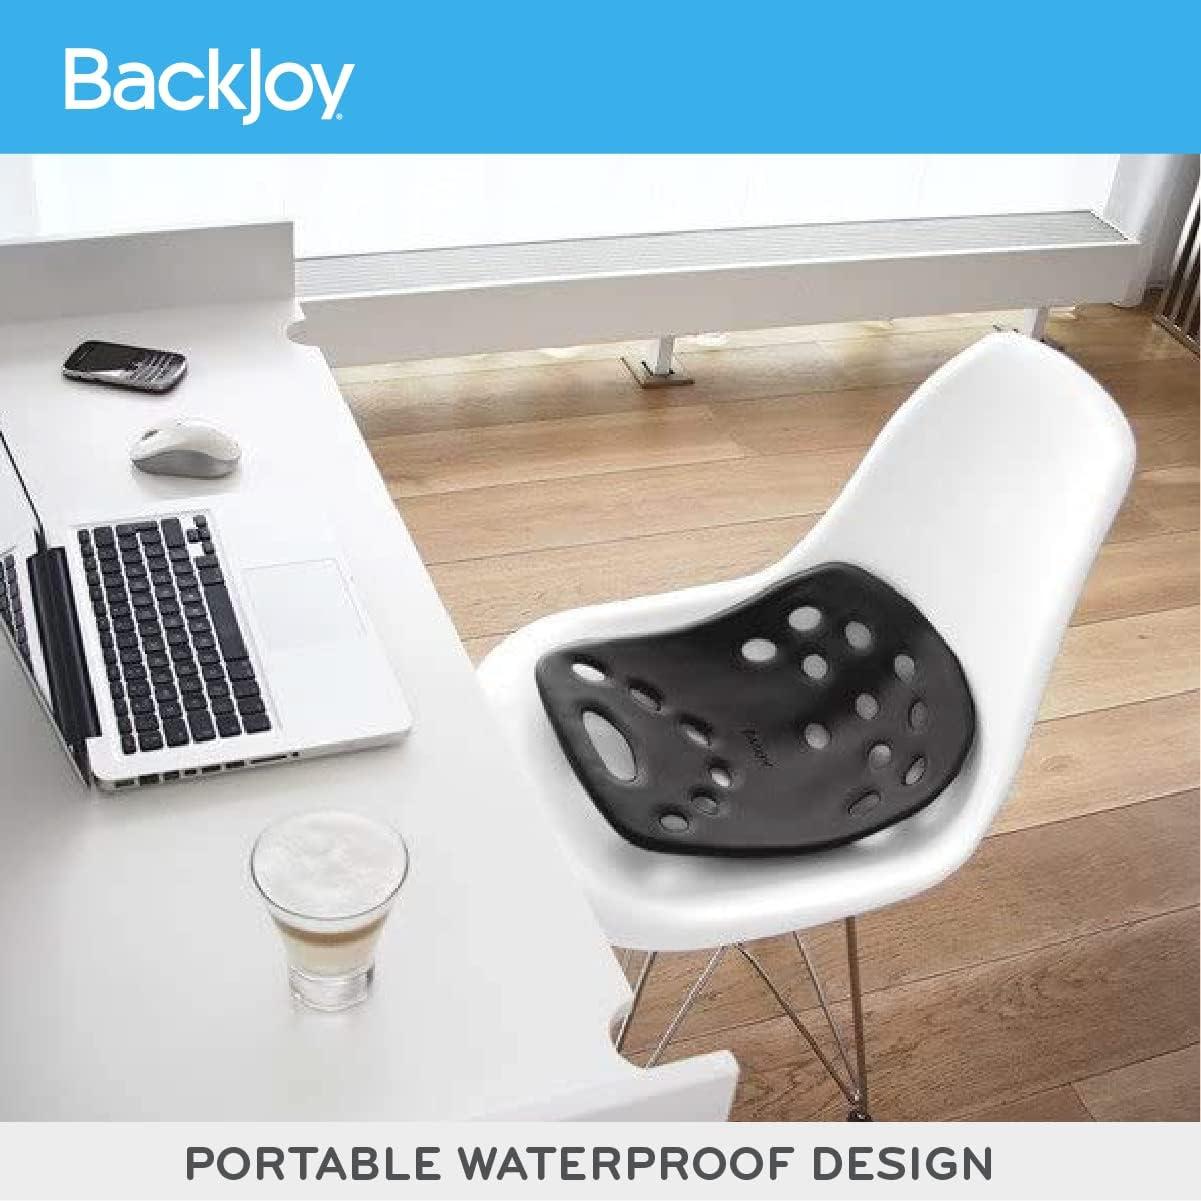 BackJoy Posture Seat Pad, Ergonomic Pressure Relief, Hip & Pelvic Support  to Improve Posture, Home, Office Chair, Car Seat, Waterproof, Fits S-L  Hips